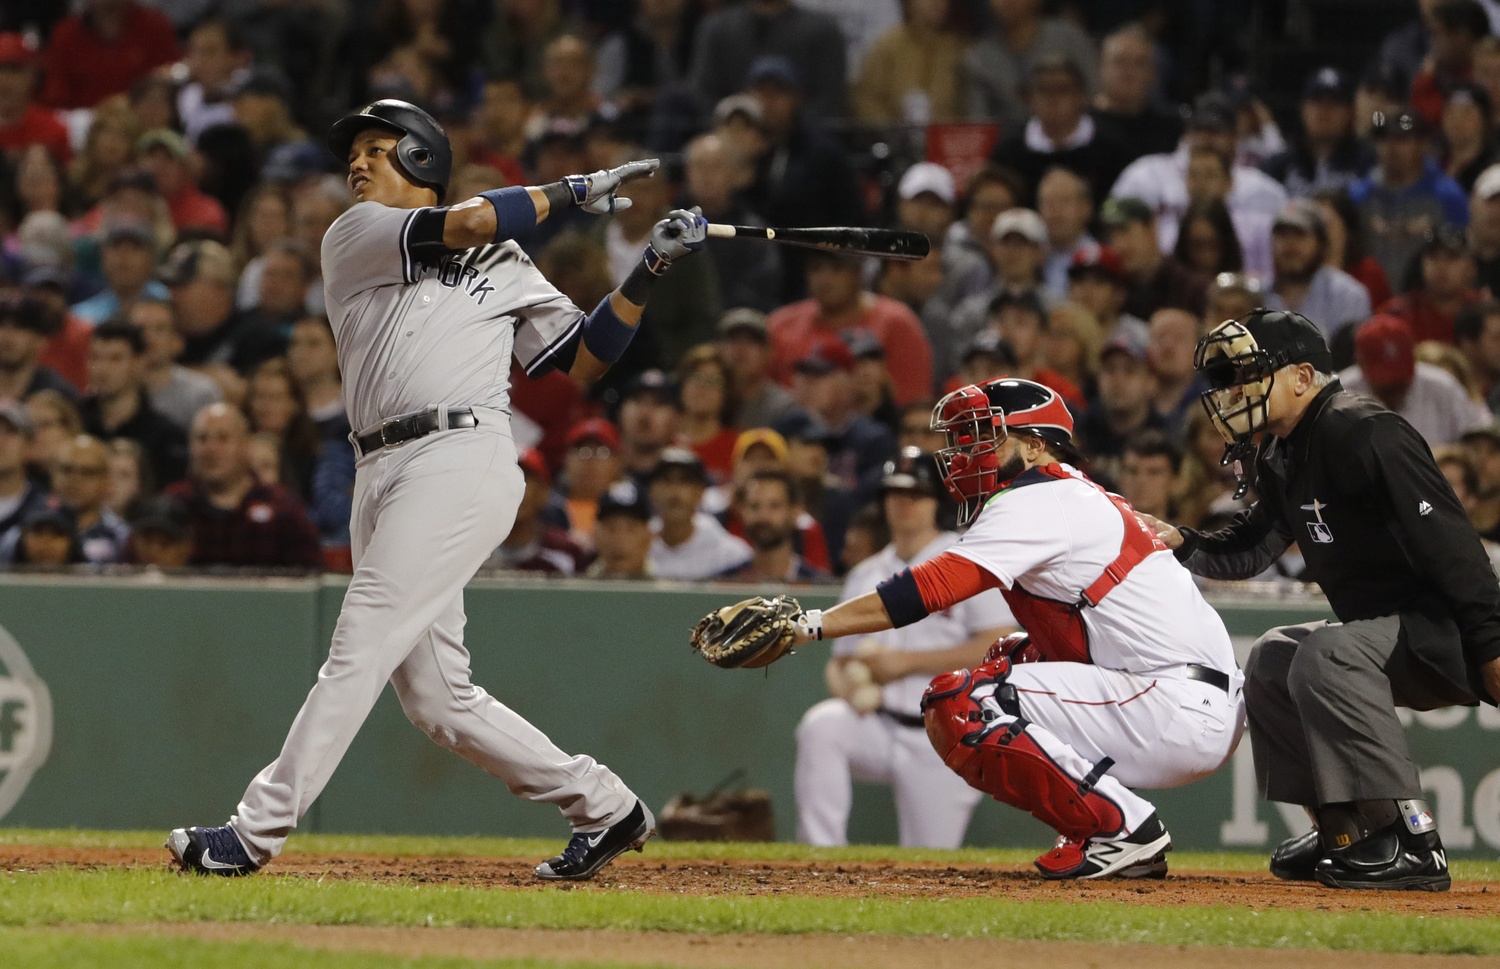 New York Yankees: Starlin Castro Leaves Game With Apparent Injury 